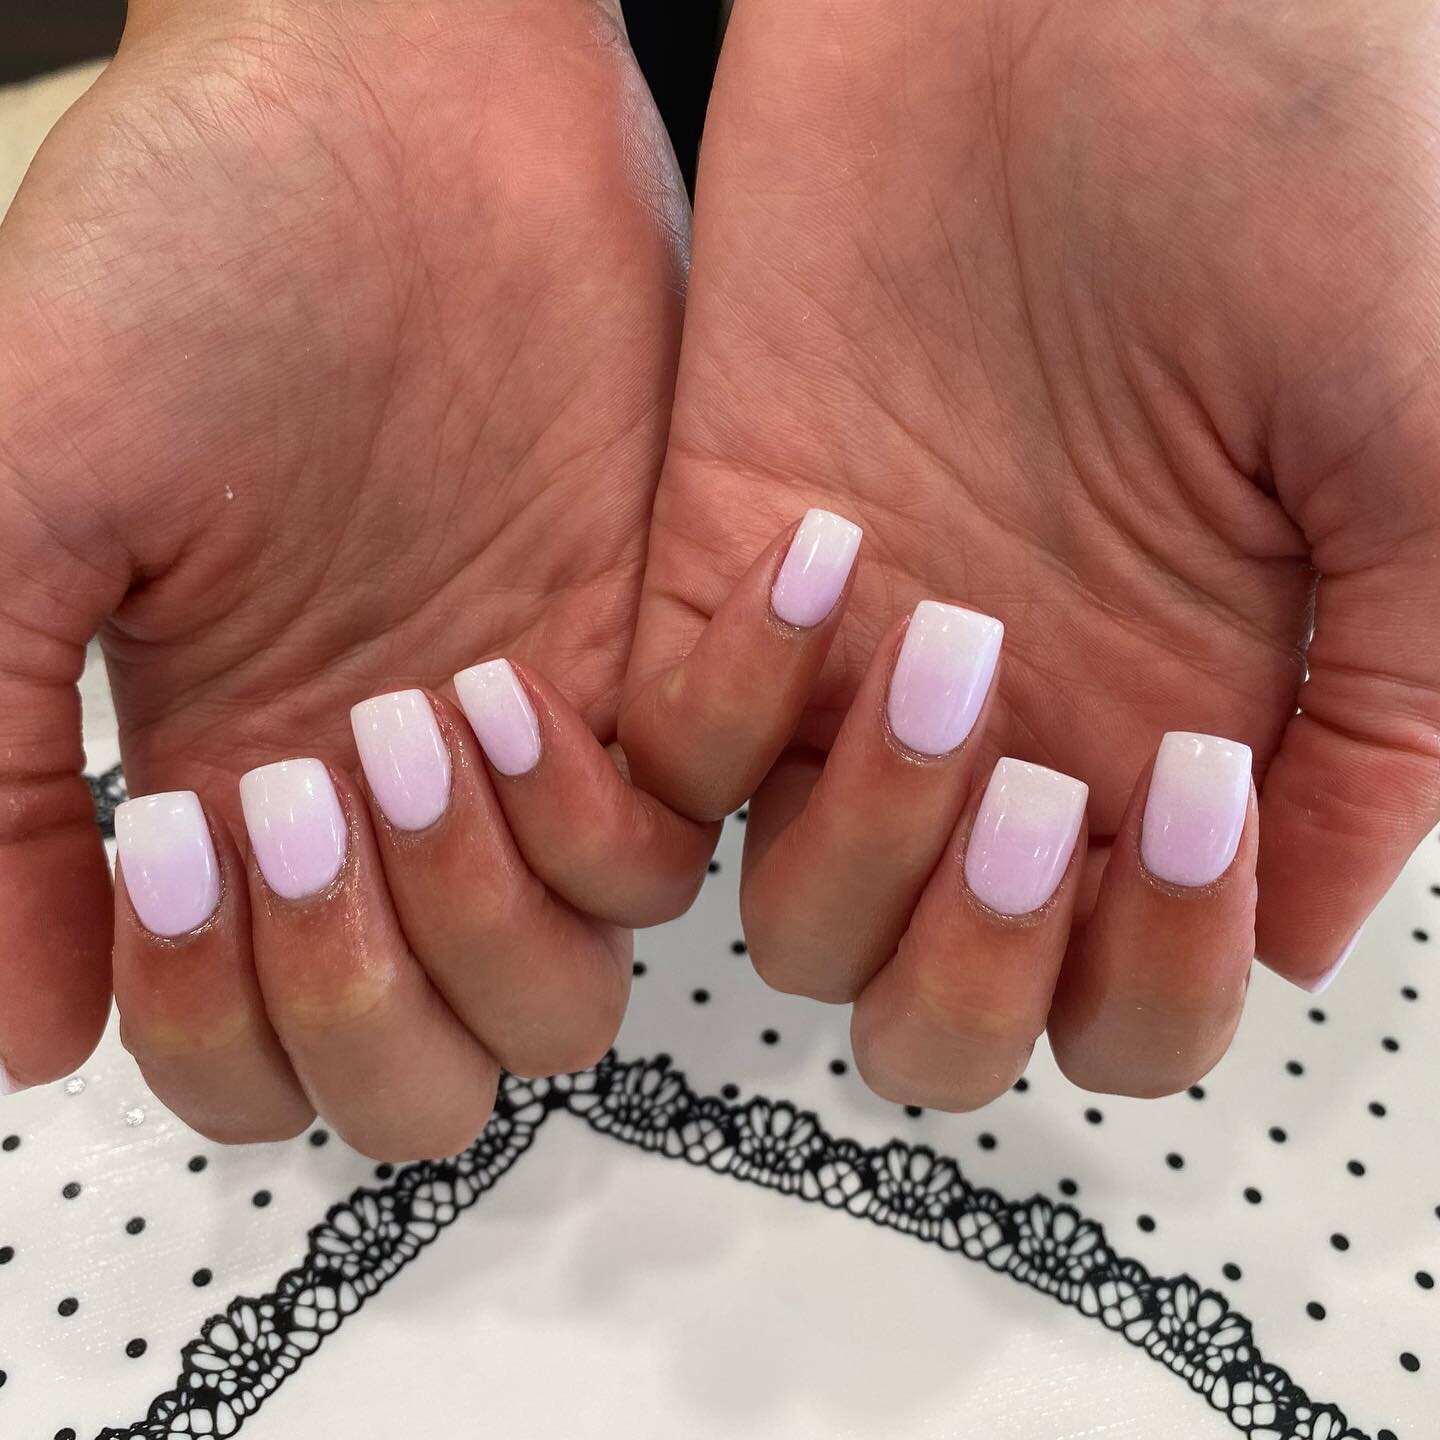 New style for the Ombr&eacute;💅✨#queenhousenailspa.